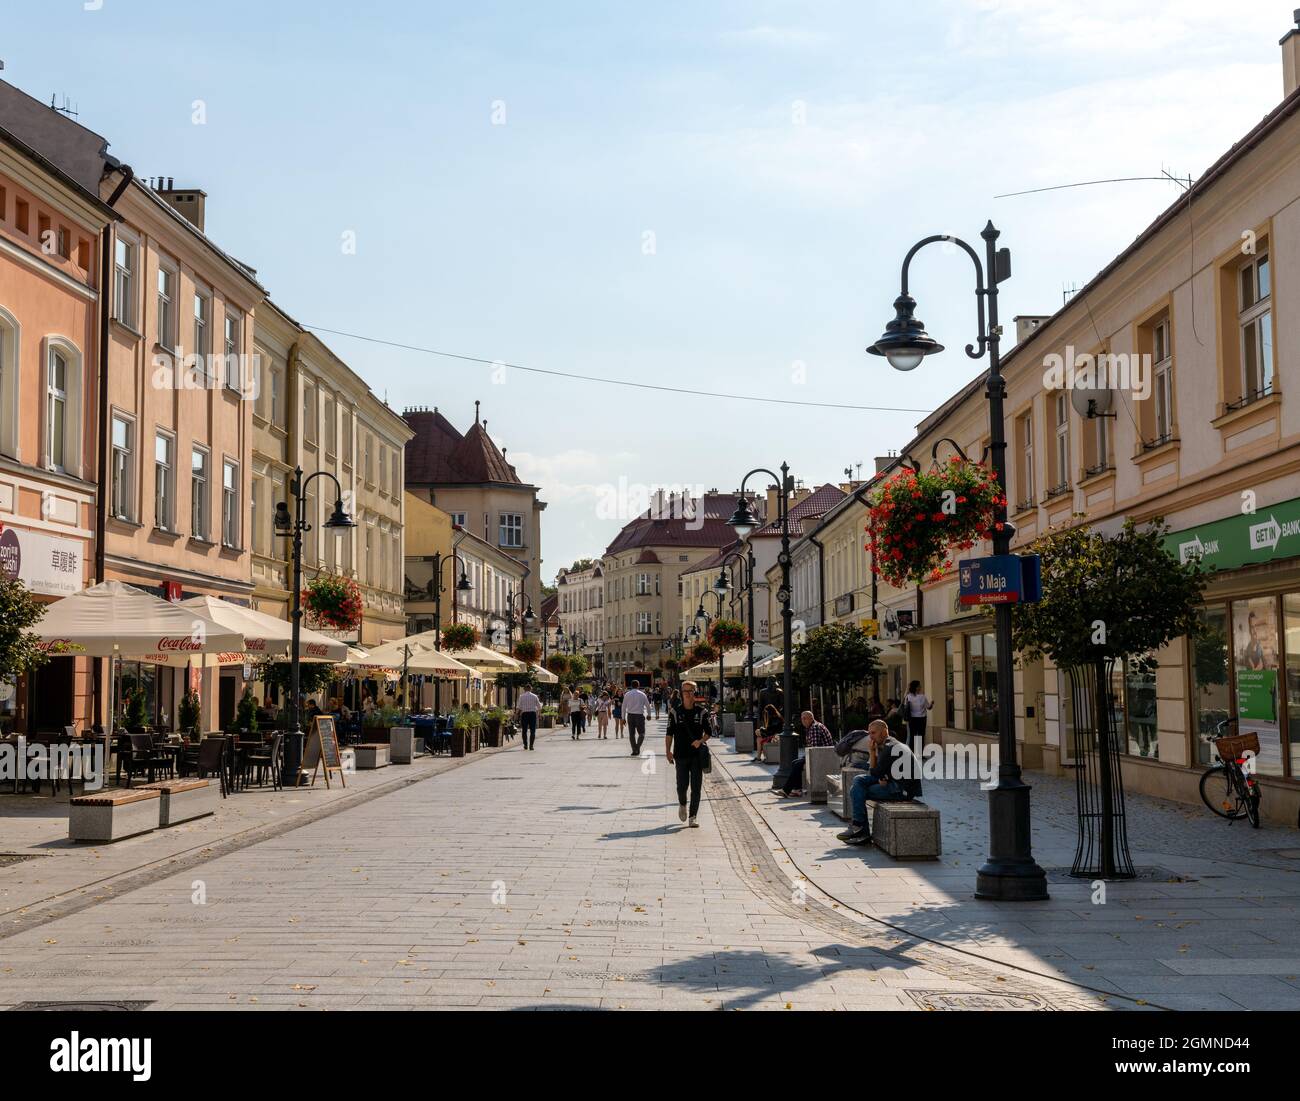 Rzeszow, Poland - 14 September, 2021: view of the 3 Maja Street in downtown Rzeszow with ist many restaurants and shops Stock Photo